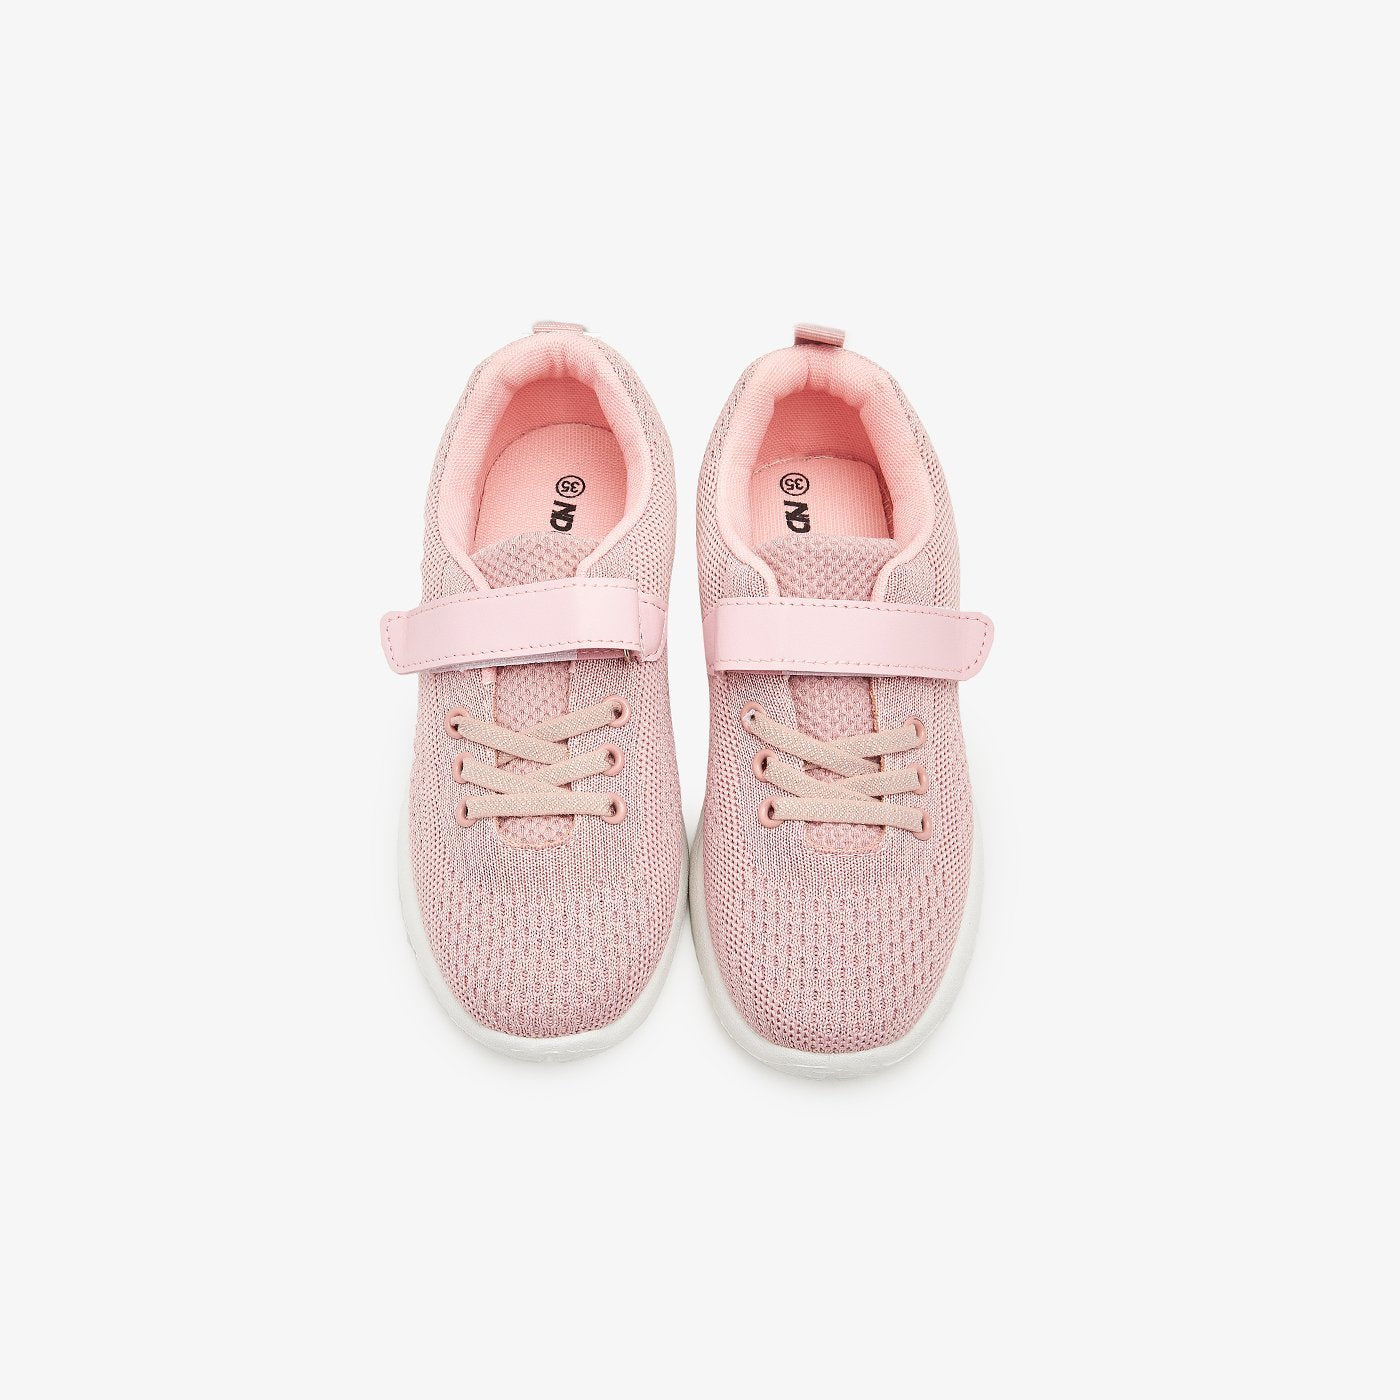 Cute Velcro Shoes for Girls